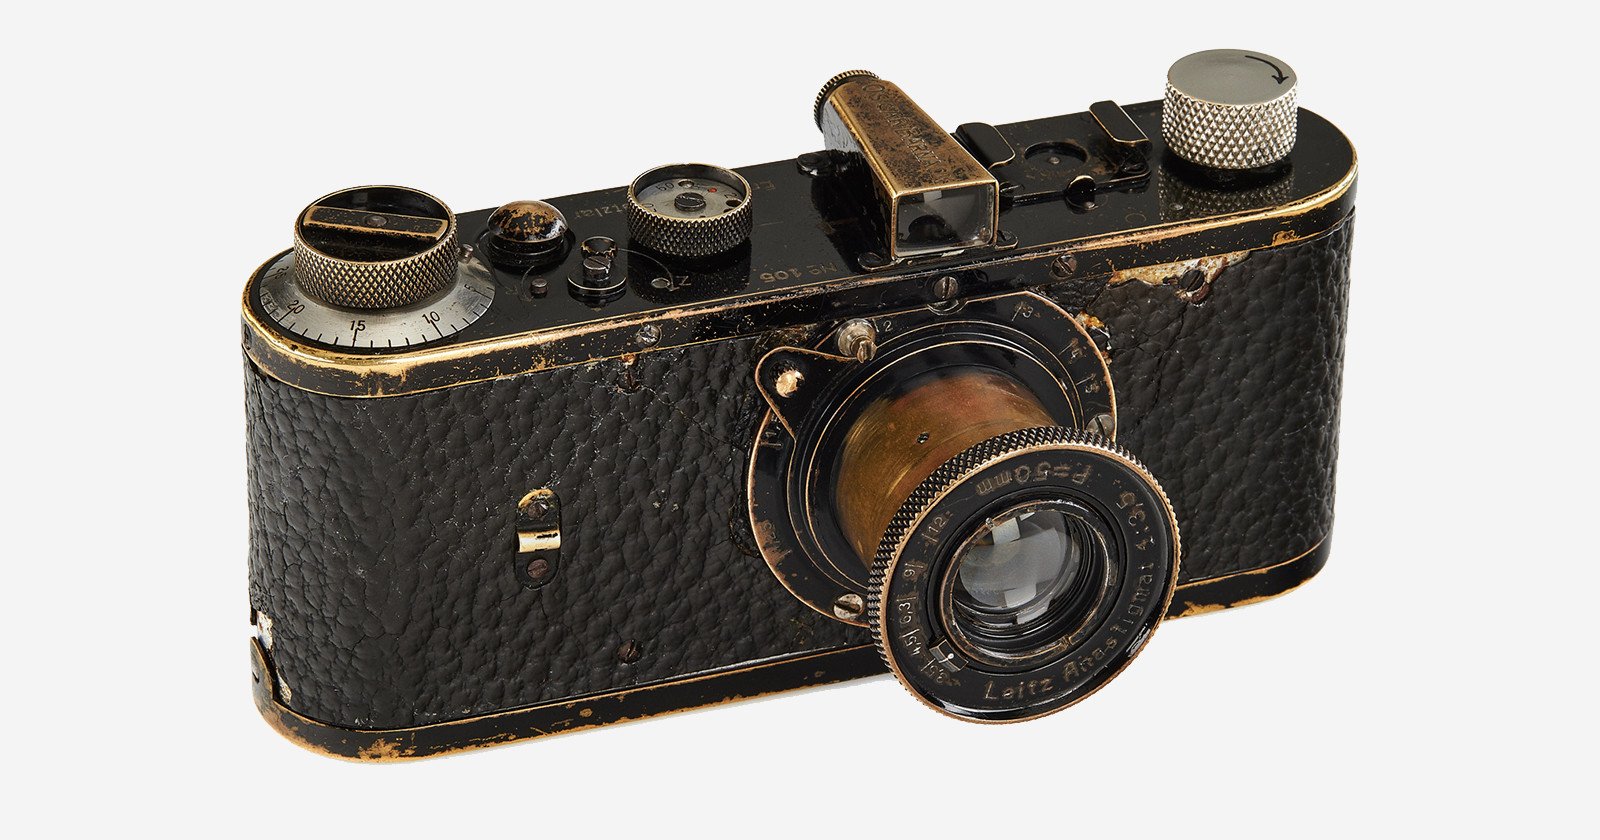 Rare 0-Series Leica From 1923 Estimated to Fetch $3.2 Million at Auction